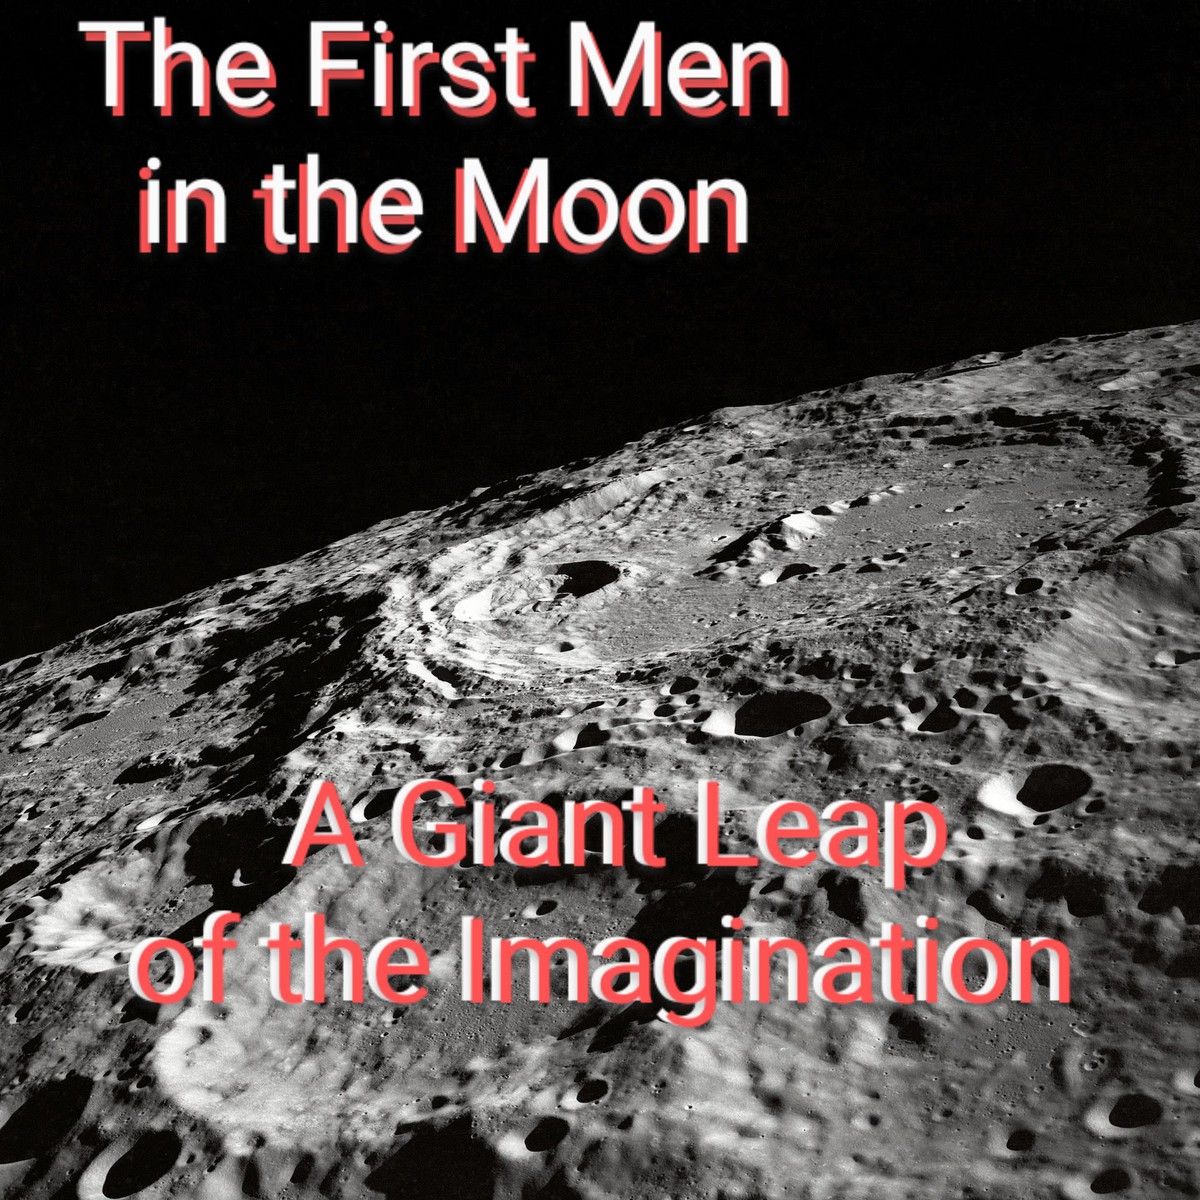 'The First Men in the Moon'